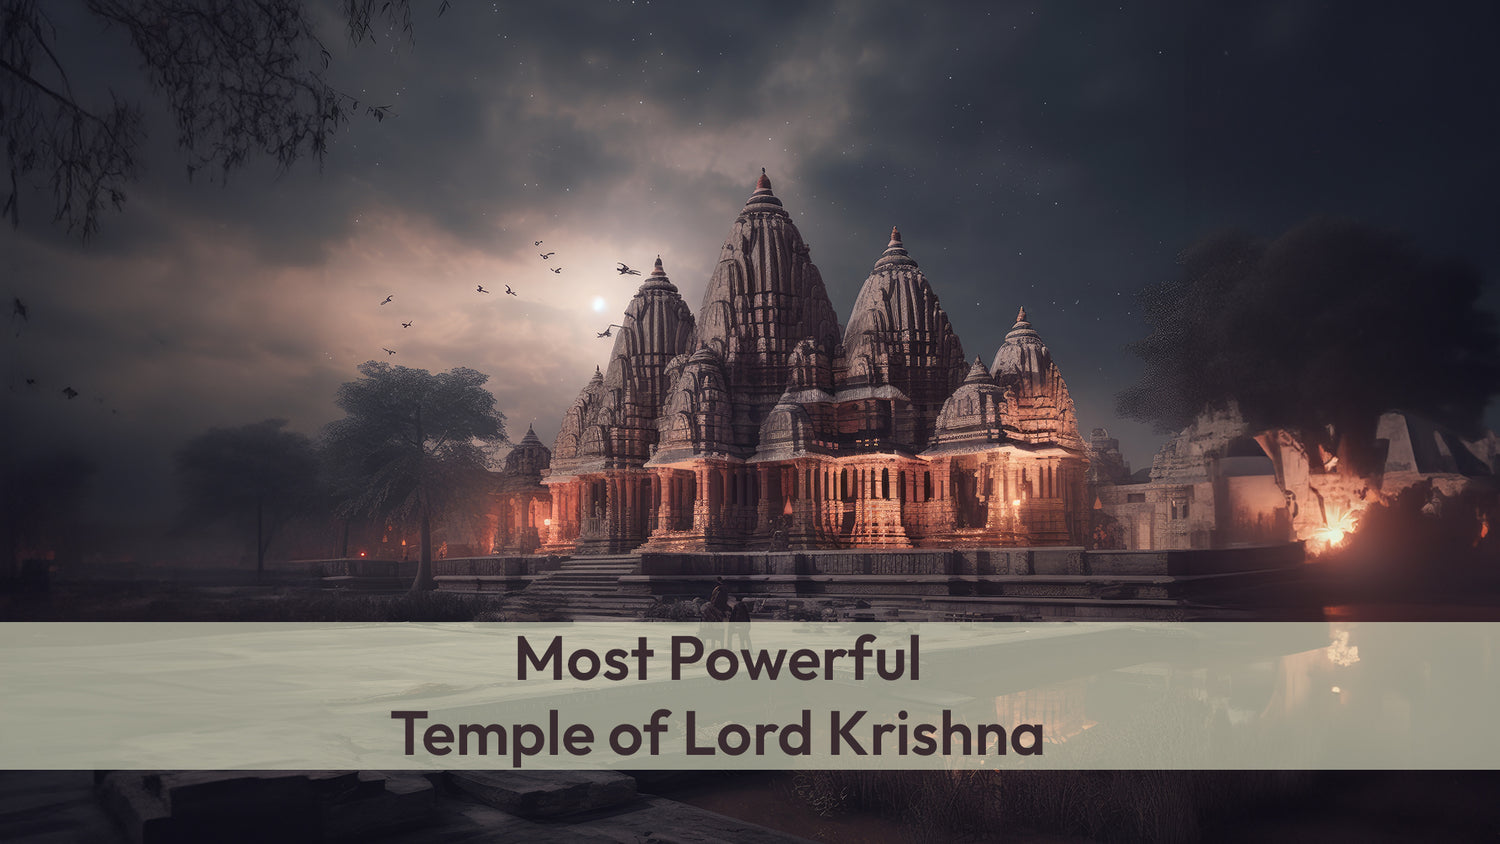 Which is the Most Powerful Temple of Lord Krishna? Take a Tour of the Biggest Krishna Temple in India